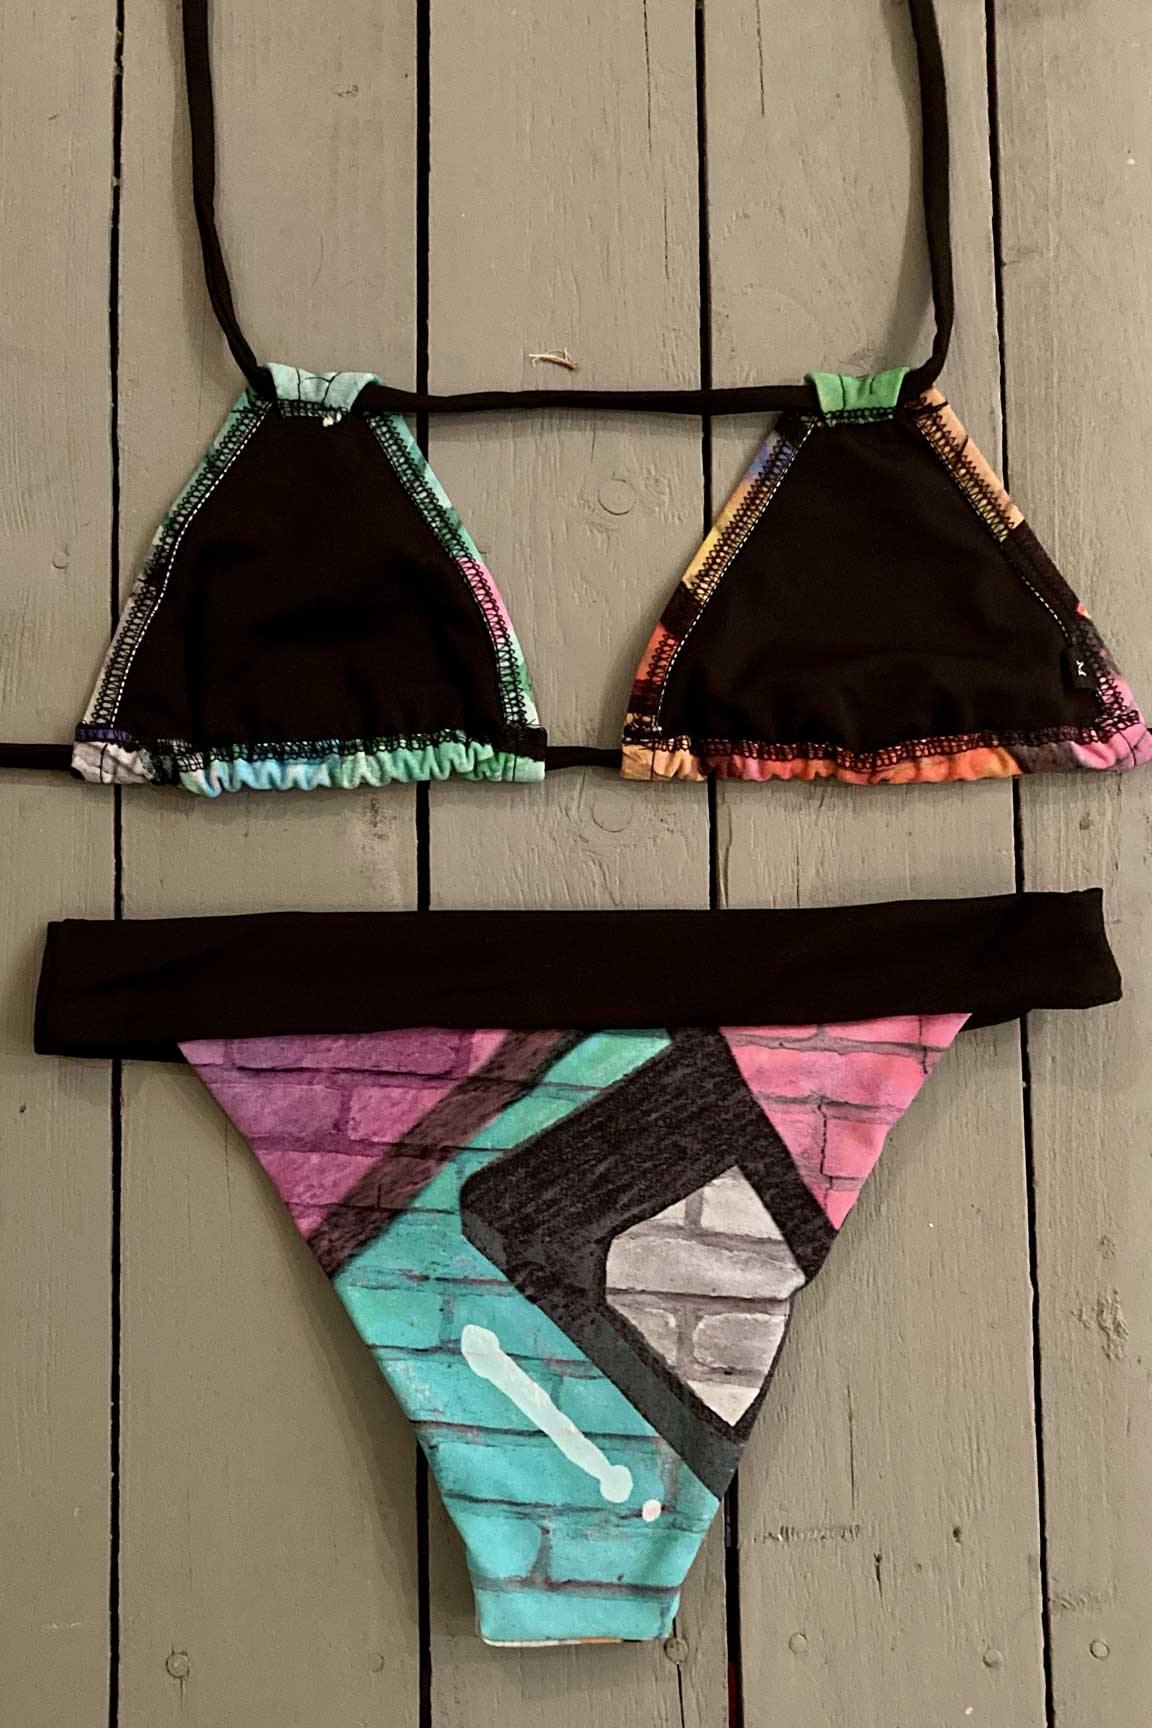 Enjoy days at the beach or pool in this Britto print double string triangle bikini top. This adjustable triangle bikini top is very versatile and can be worn in three different ways. Made with the finest quality of soft and stretchy Lycra to achieve the best fit. Order yours today. @jillesbikinis 